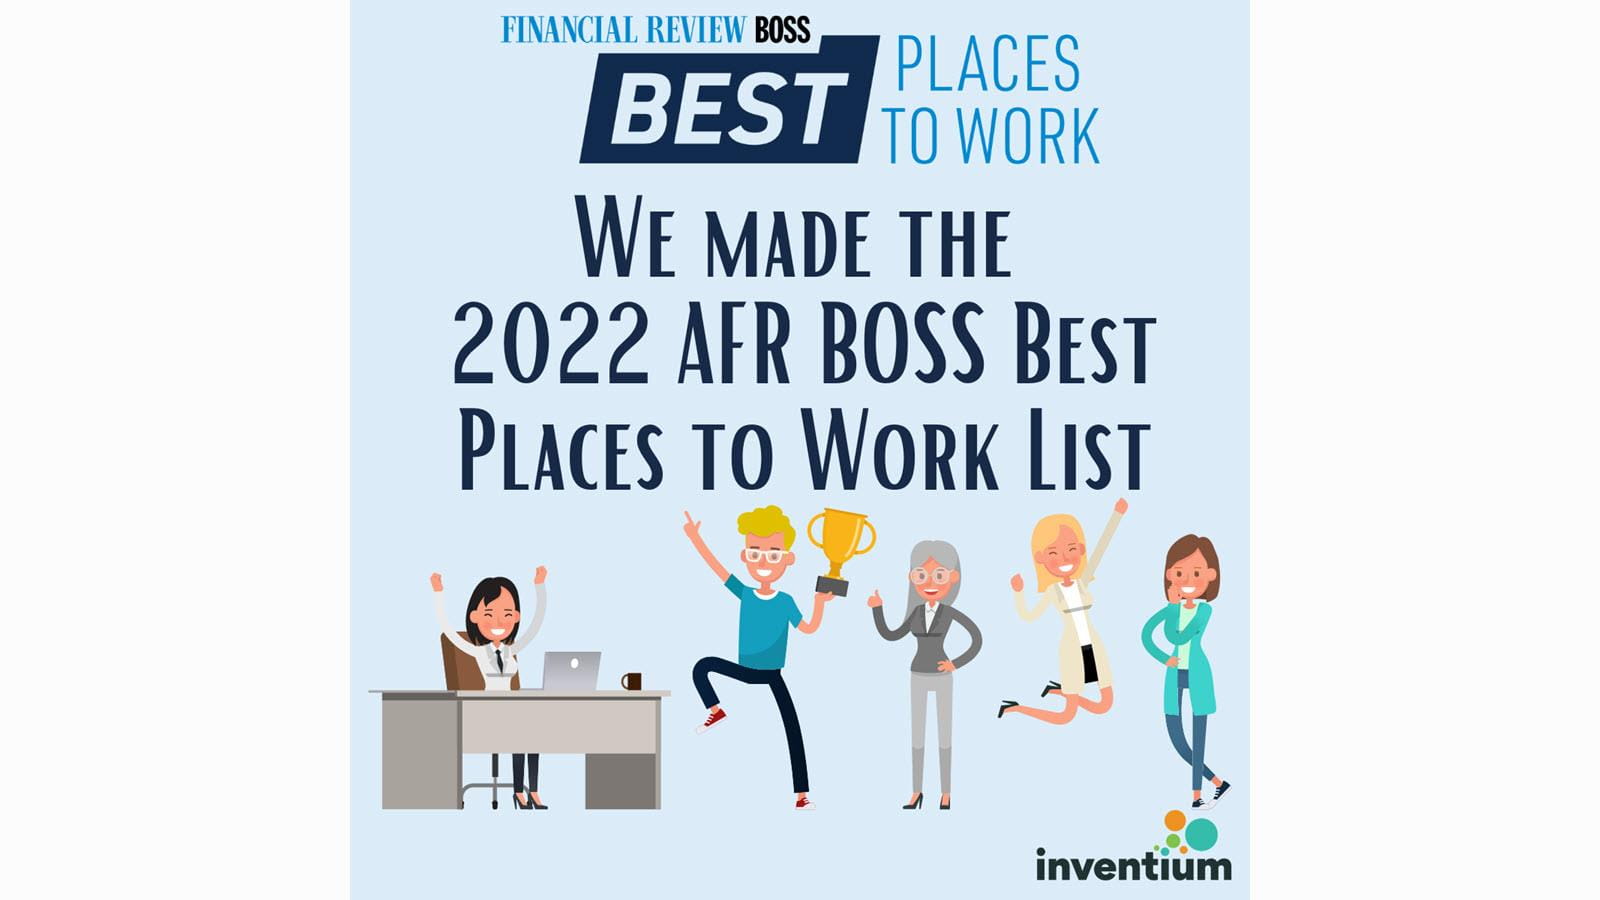 Australian Financial Review Best Places to Work 2022